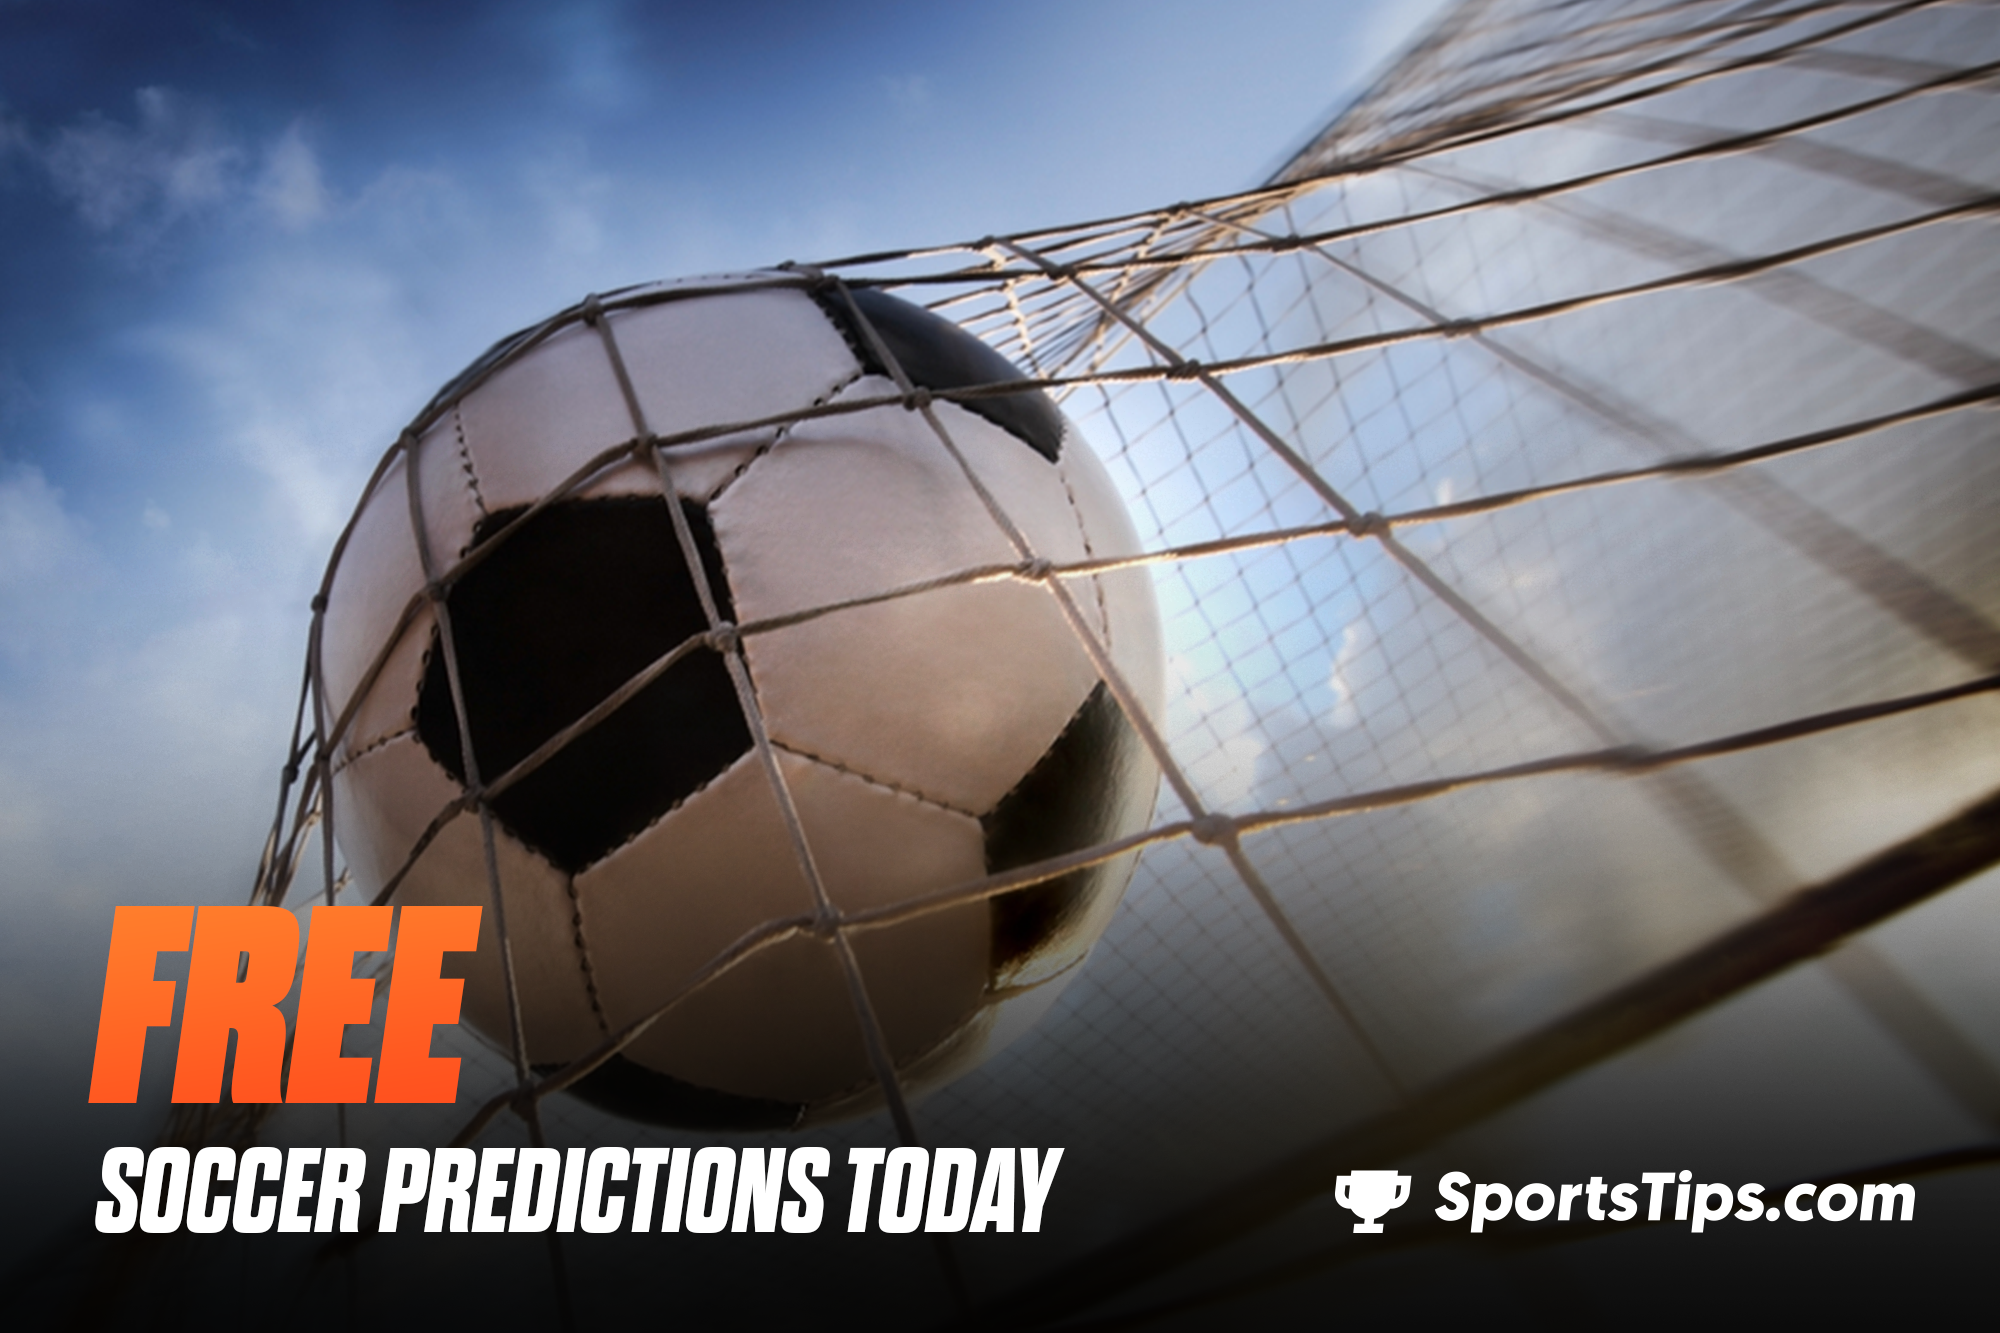 Free FIFA World Cup Picks Today for Tuesday, November 29th, 2022